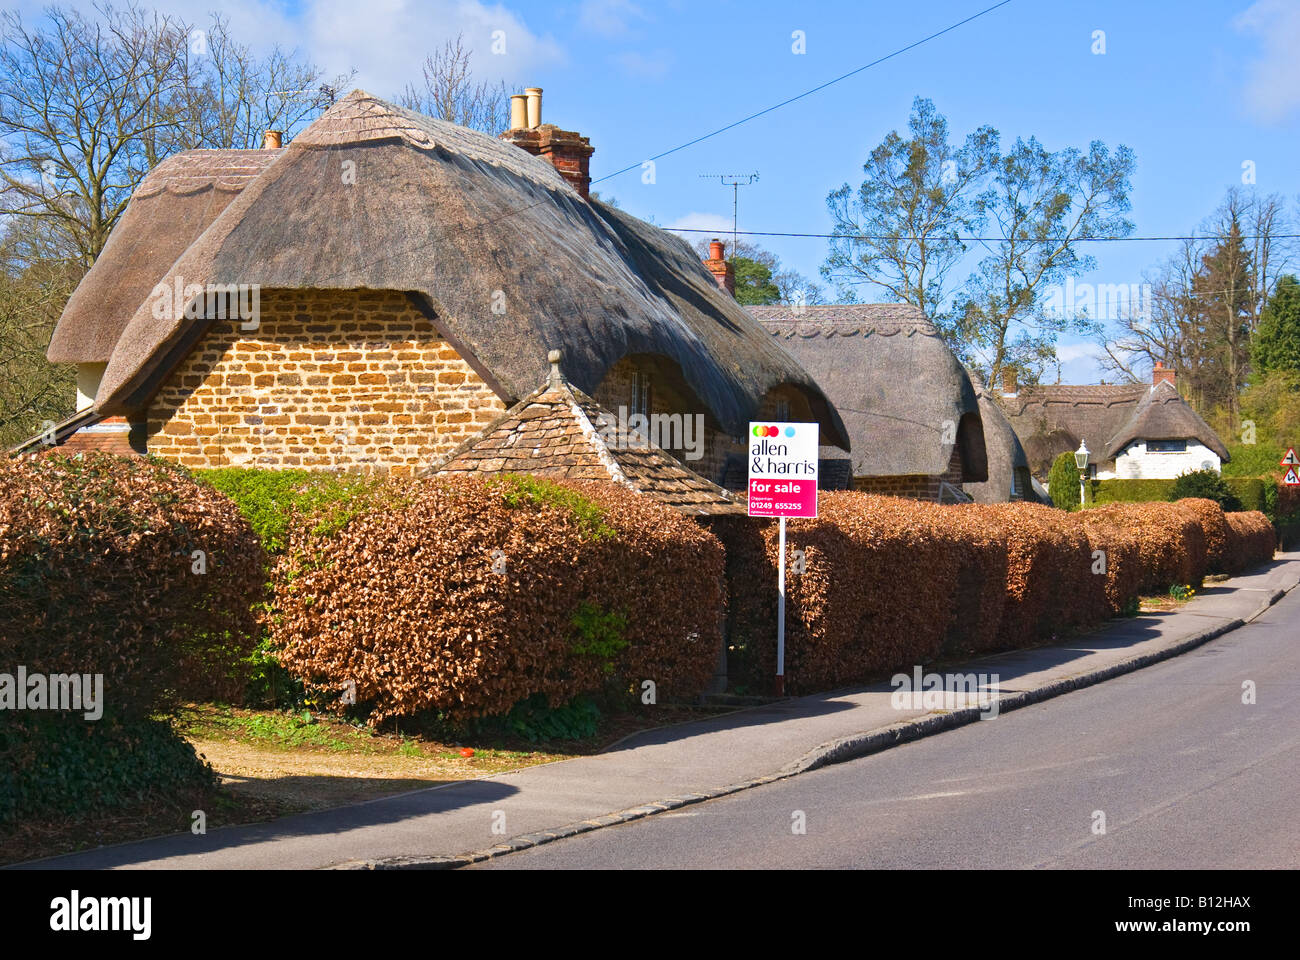 One Of A Row Of Attractive English Thatched Cottages For Sale In